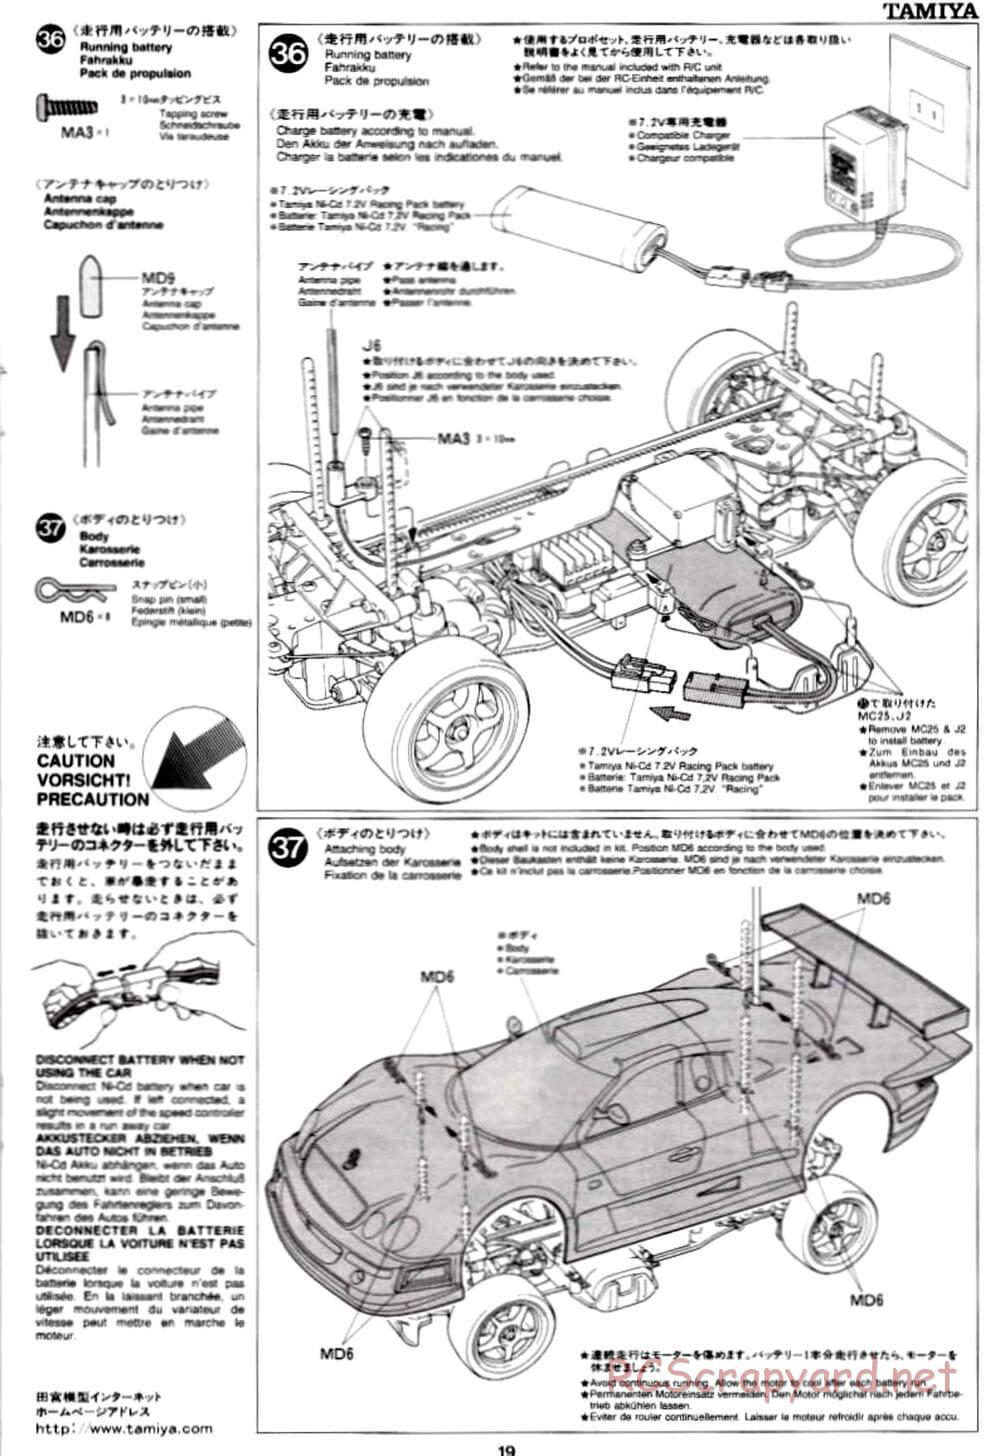 Tamiya - TA-03R TRF Special Edition Chassis - Manual - Page 19